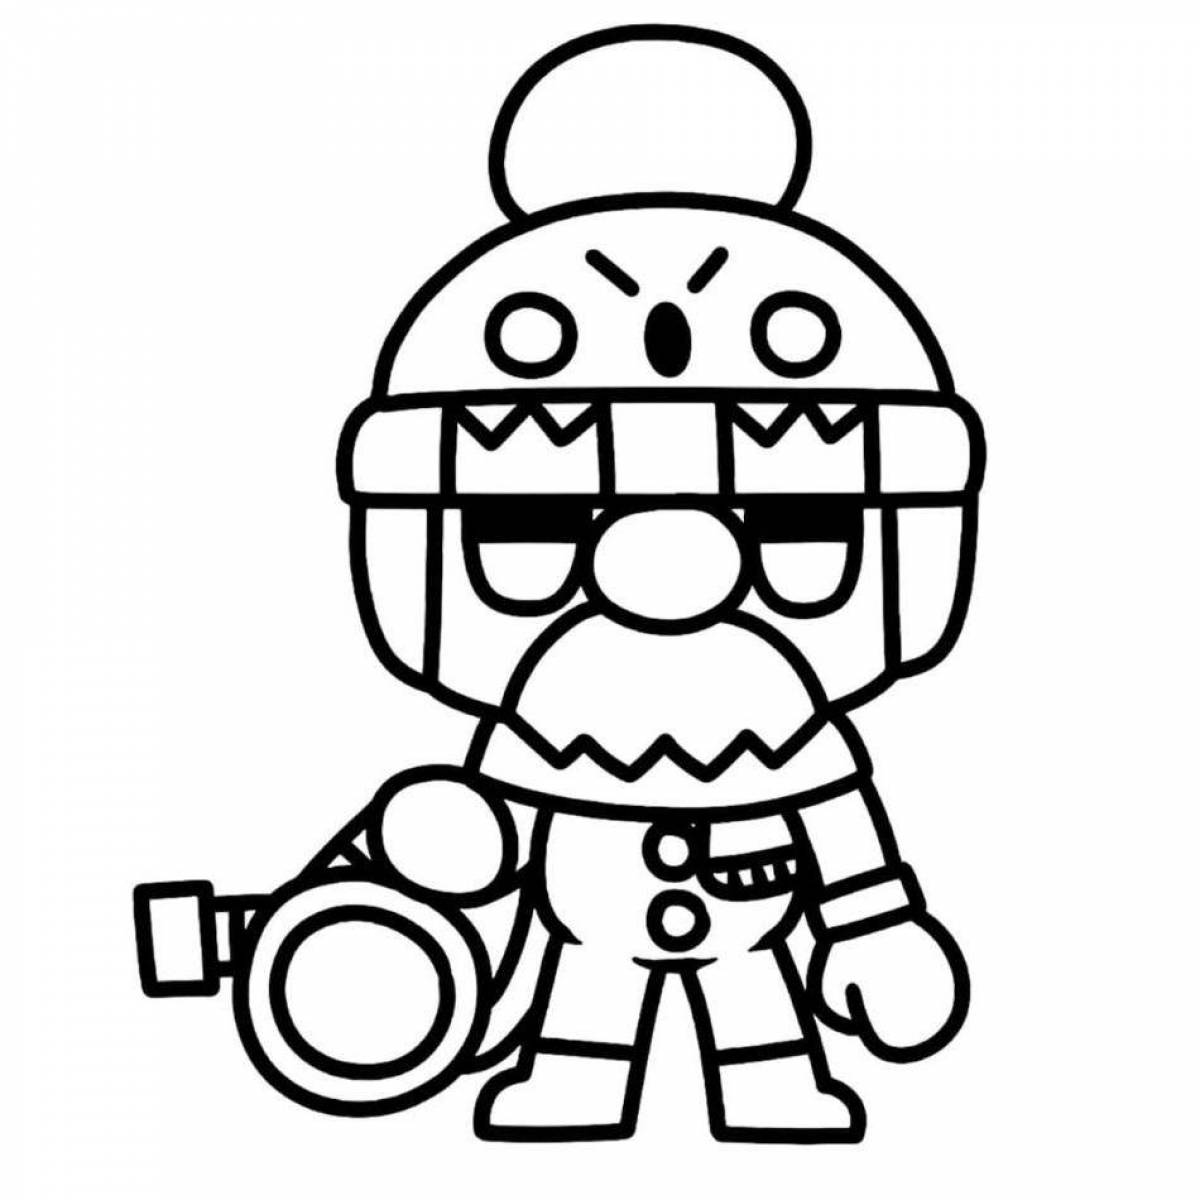 Coloring page adorable brawlers pins